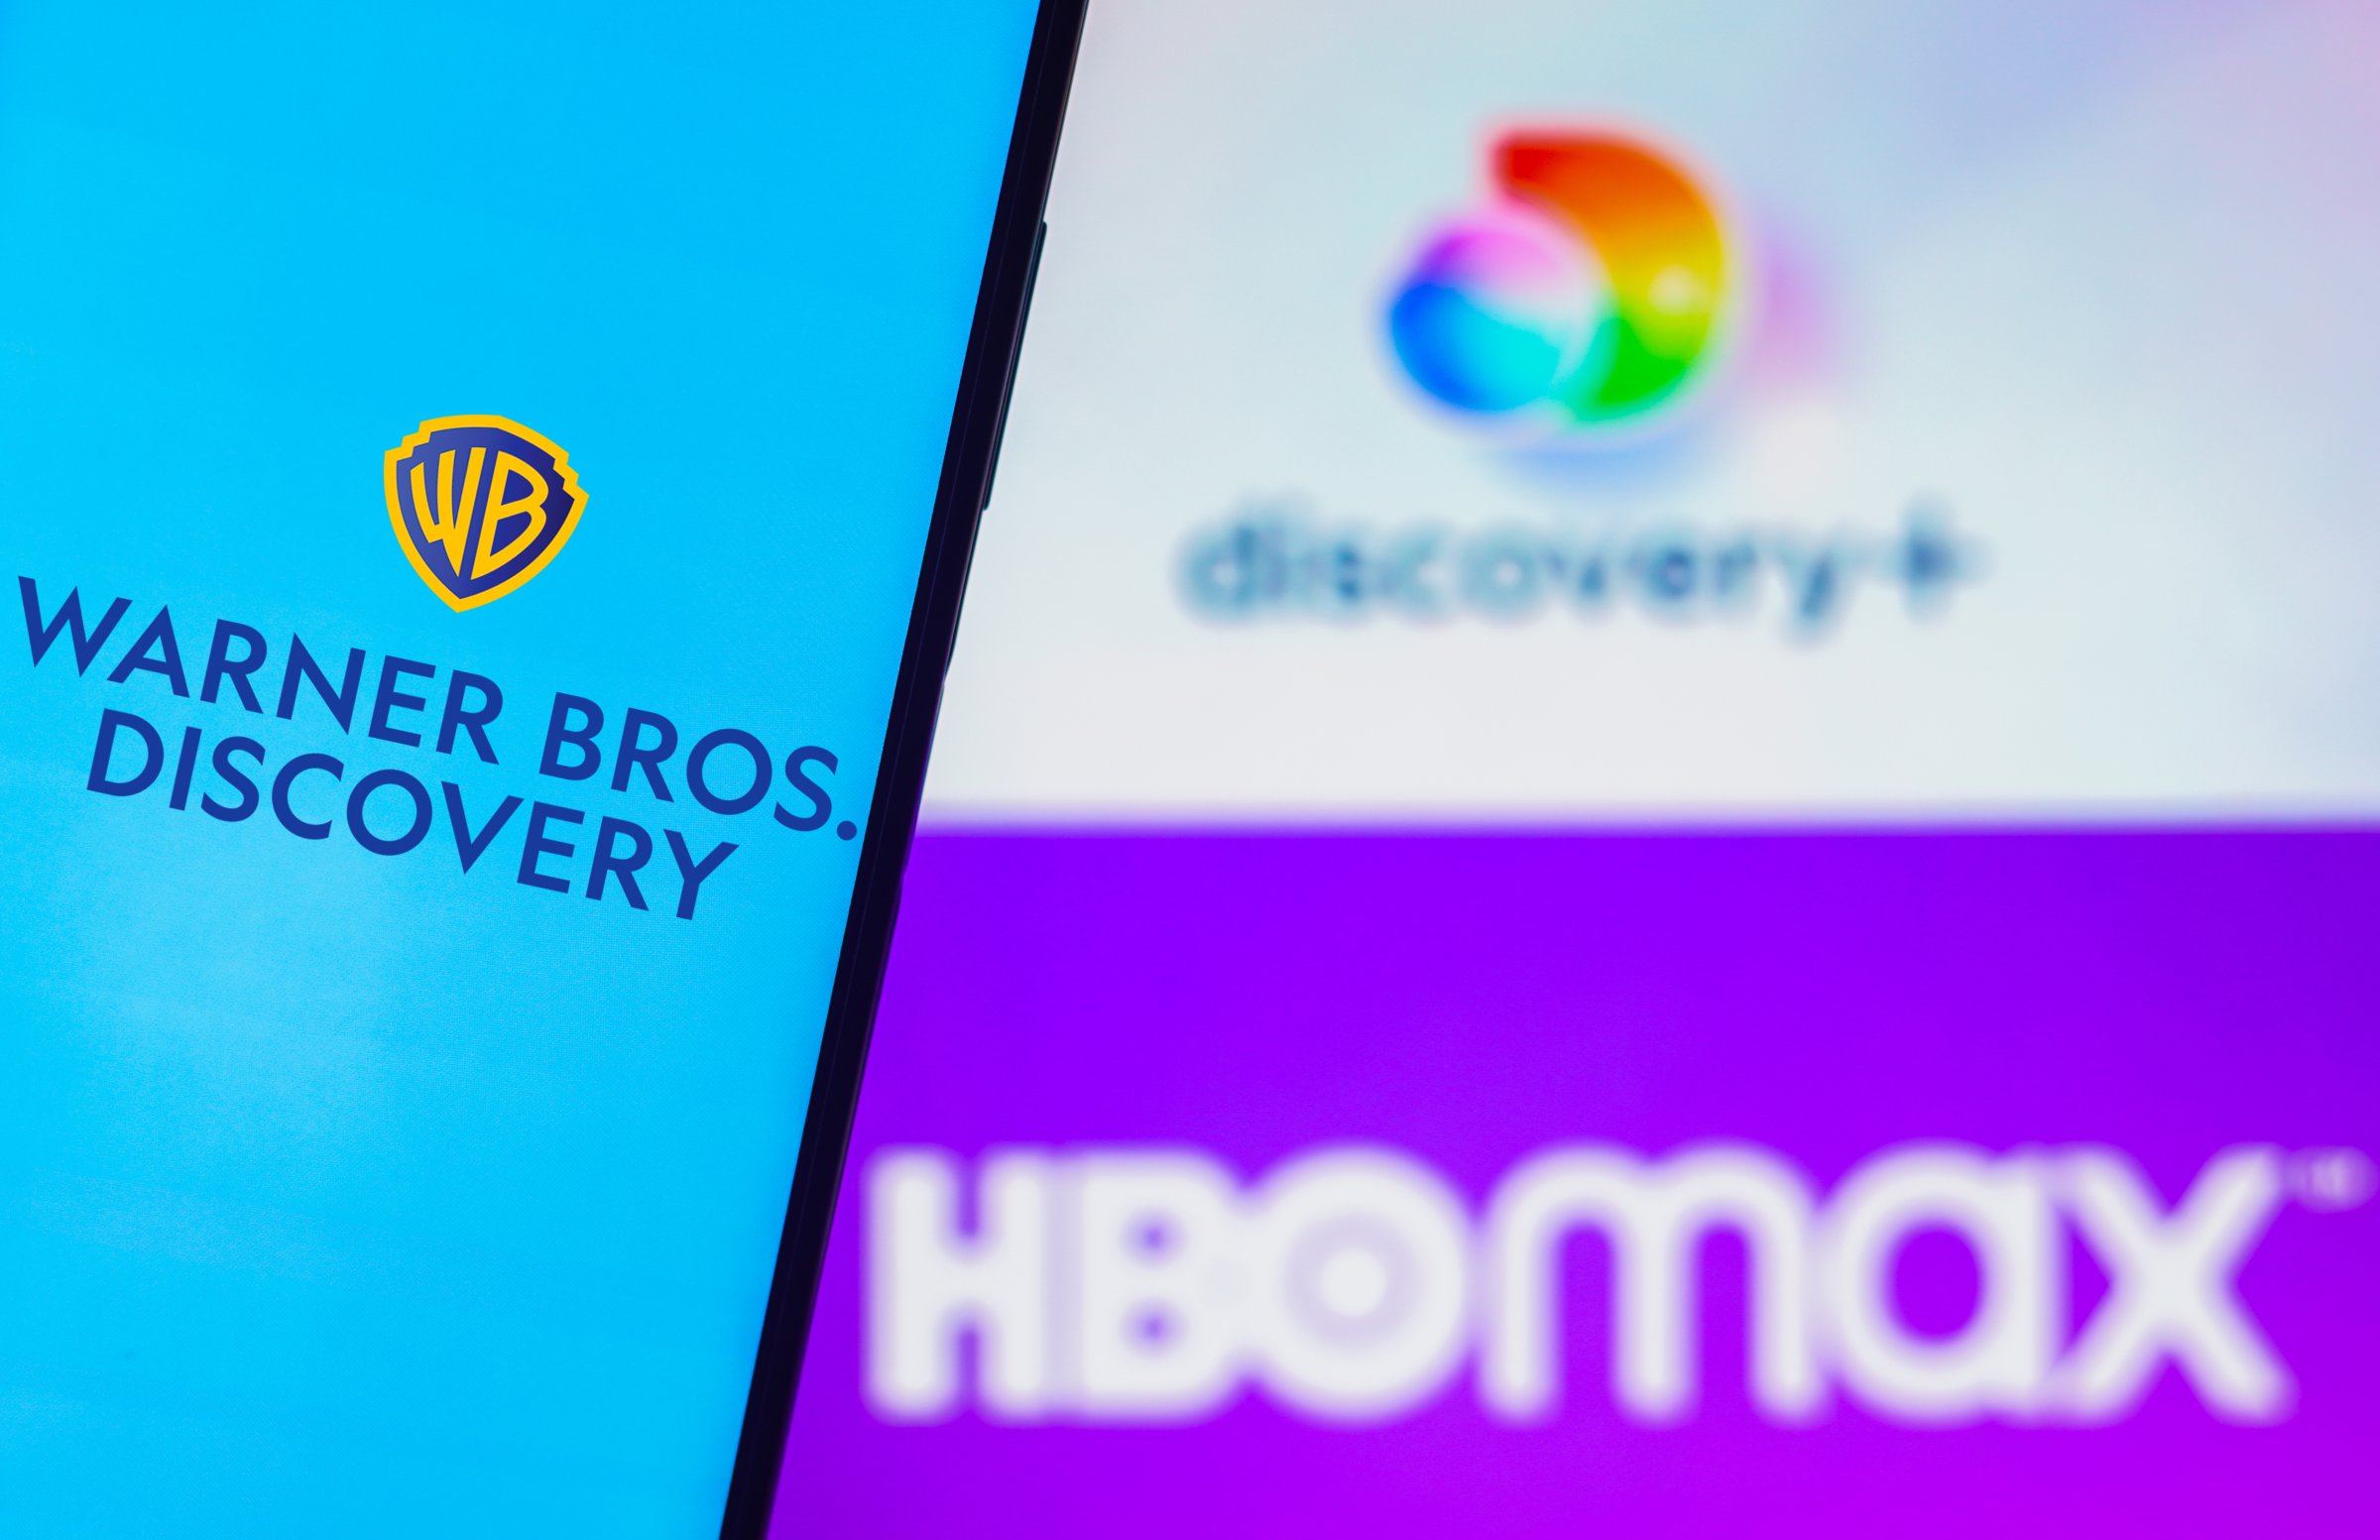 In this photo illustration, the Warner Bros. Discovery logo